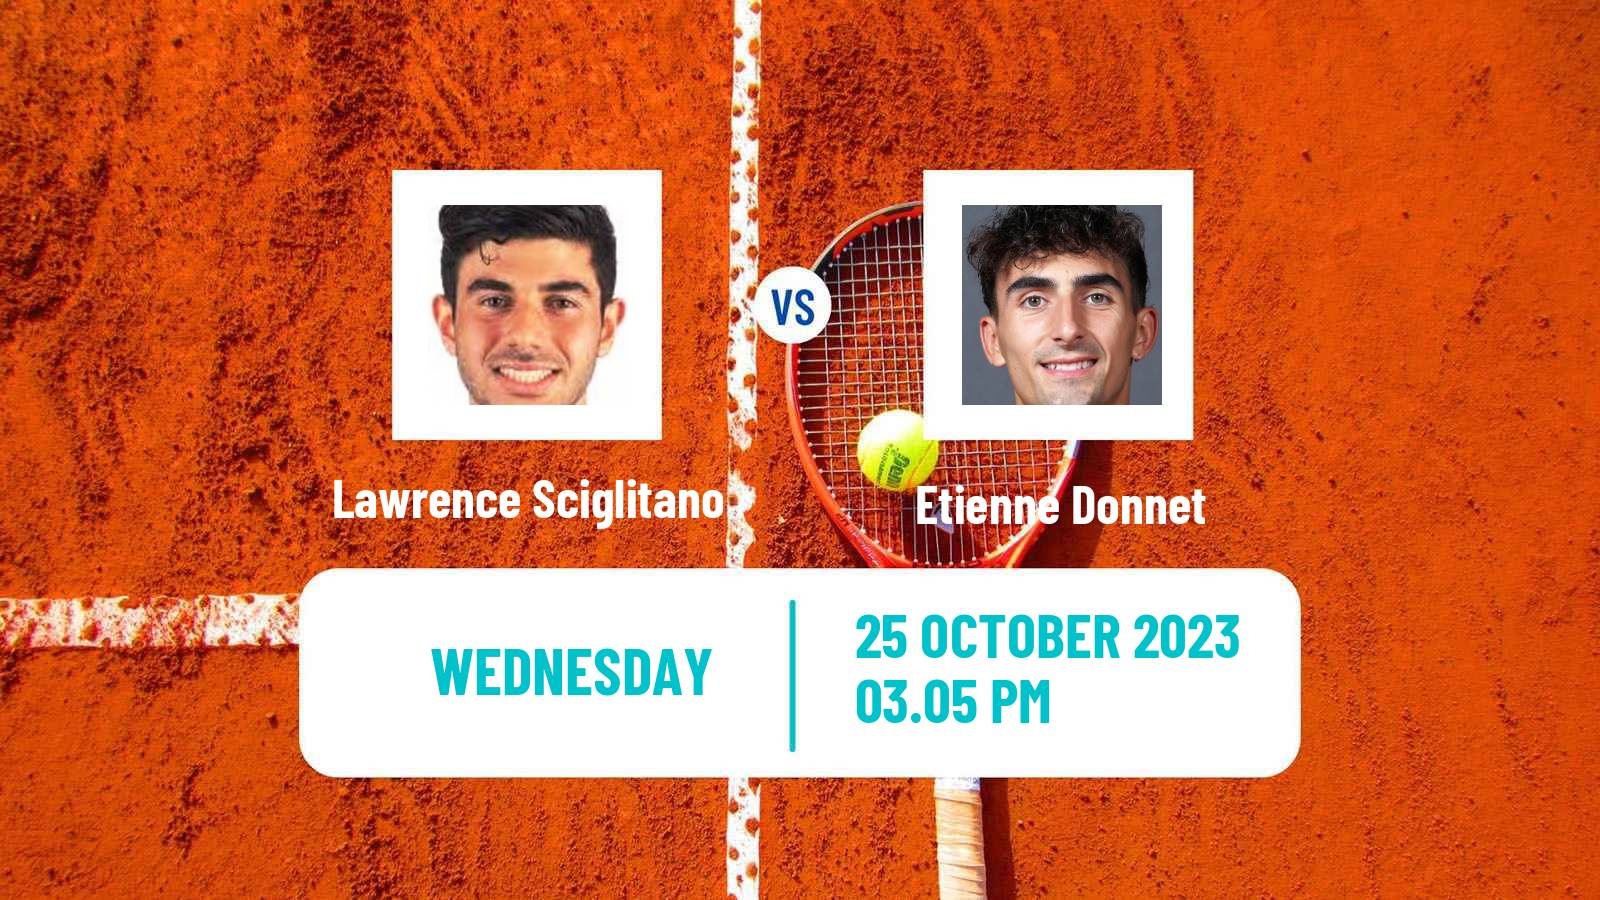 Tennis ITF M15 Tallahassee Fl Men Lawrence Sciglitano - Etienne Donnet